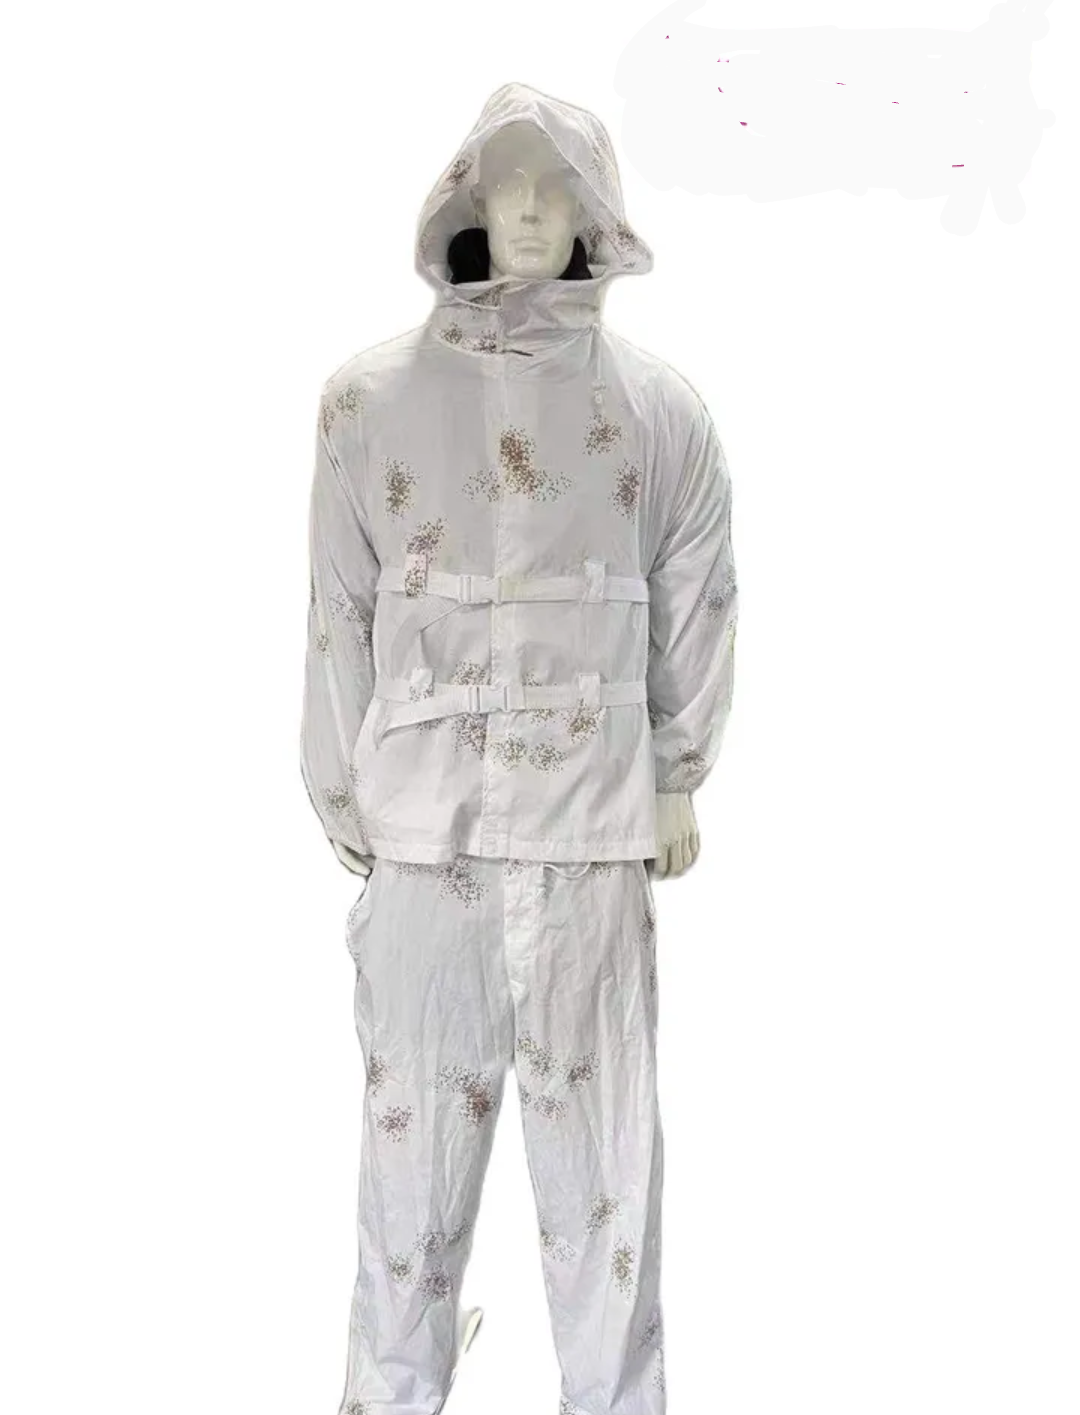 Arctic Snow Tactical Digital Camouflage coveralls - lightweight - breathable